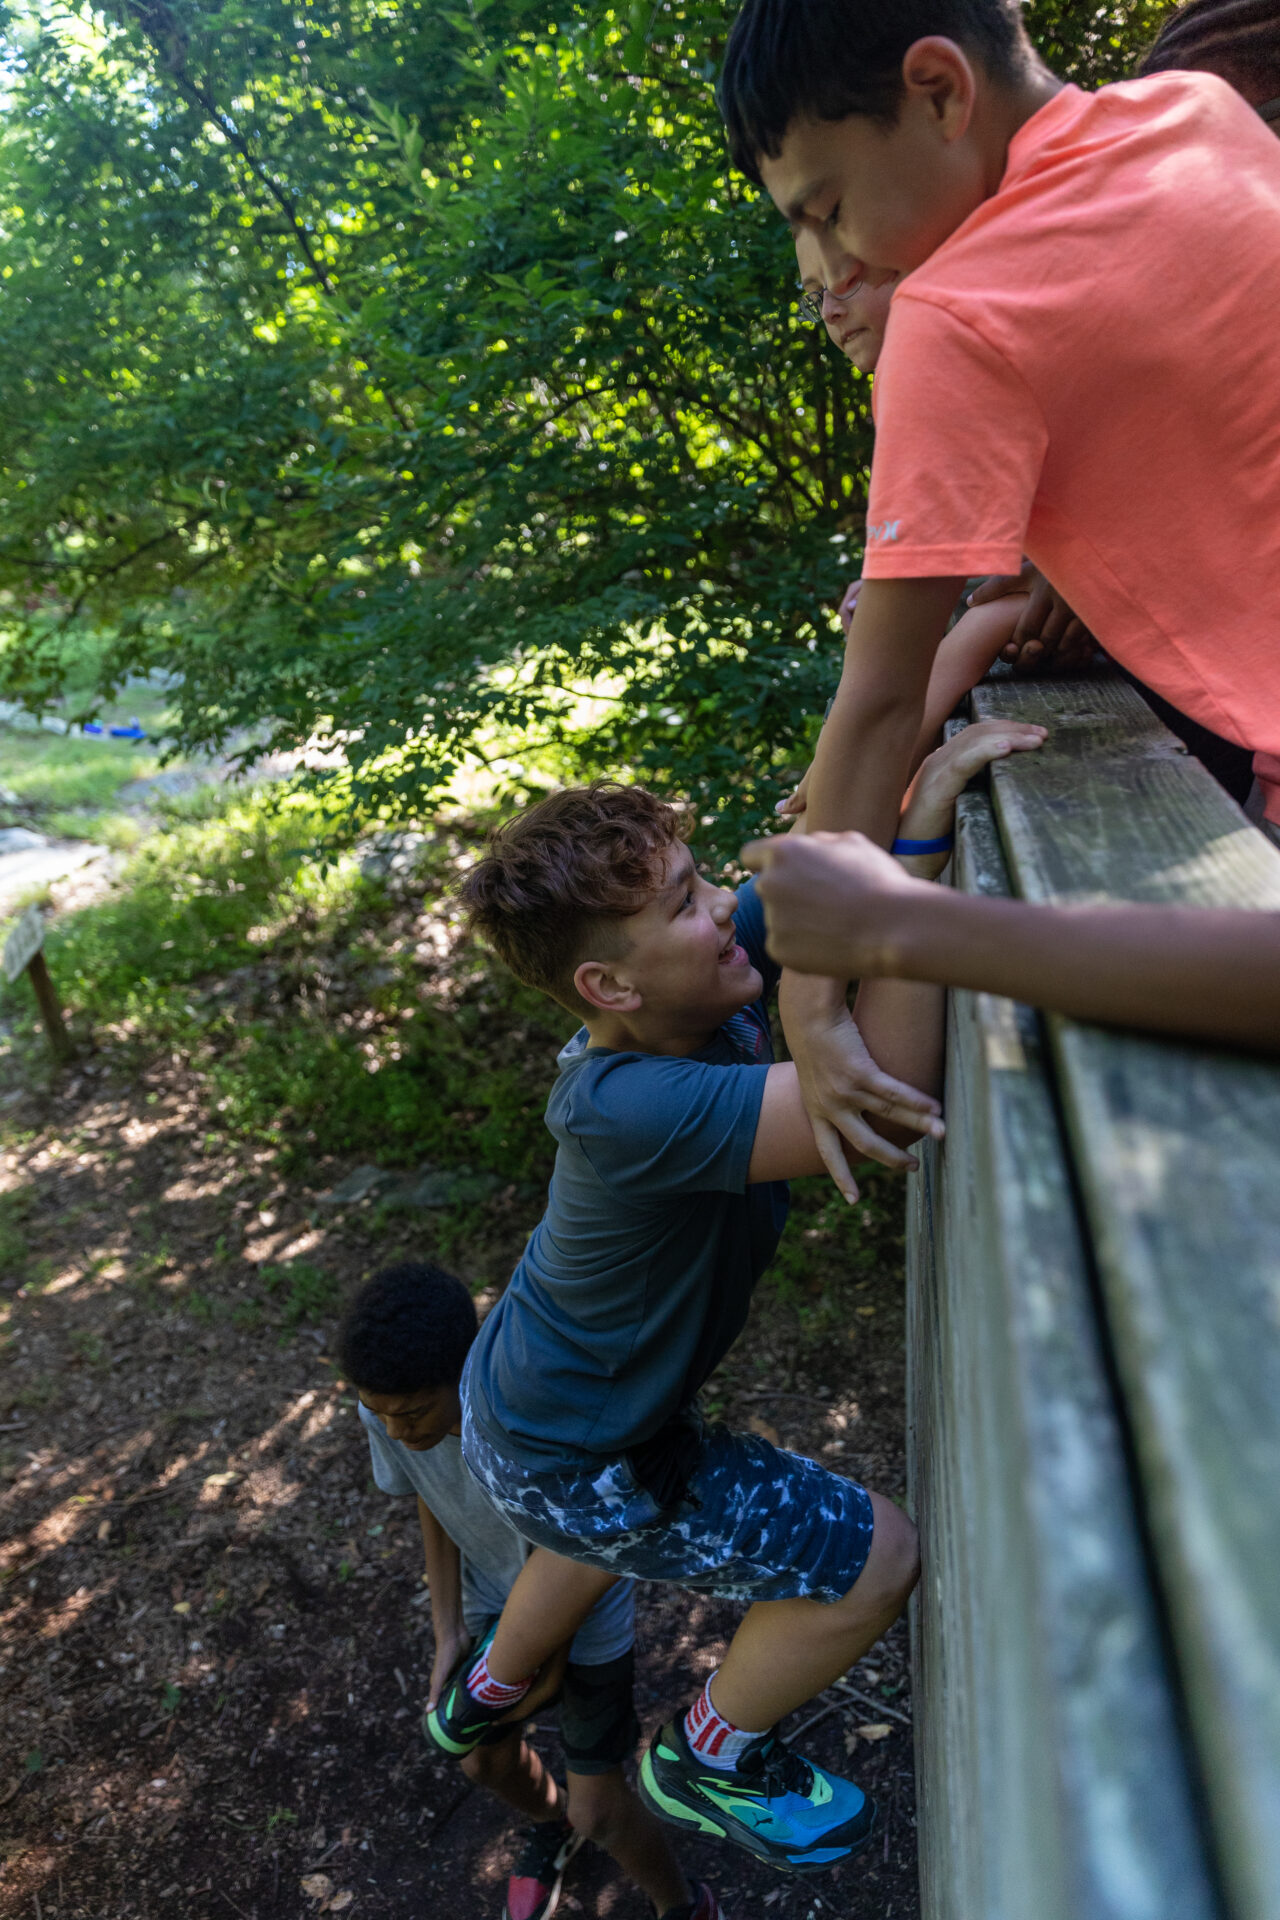 A group of kids having fun while climbing on a wooden railing in a wooded area known as BearTrax.